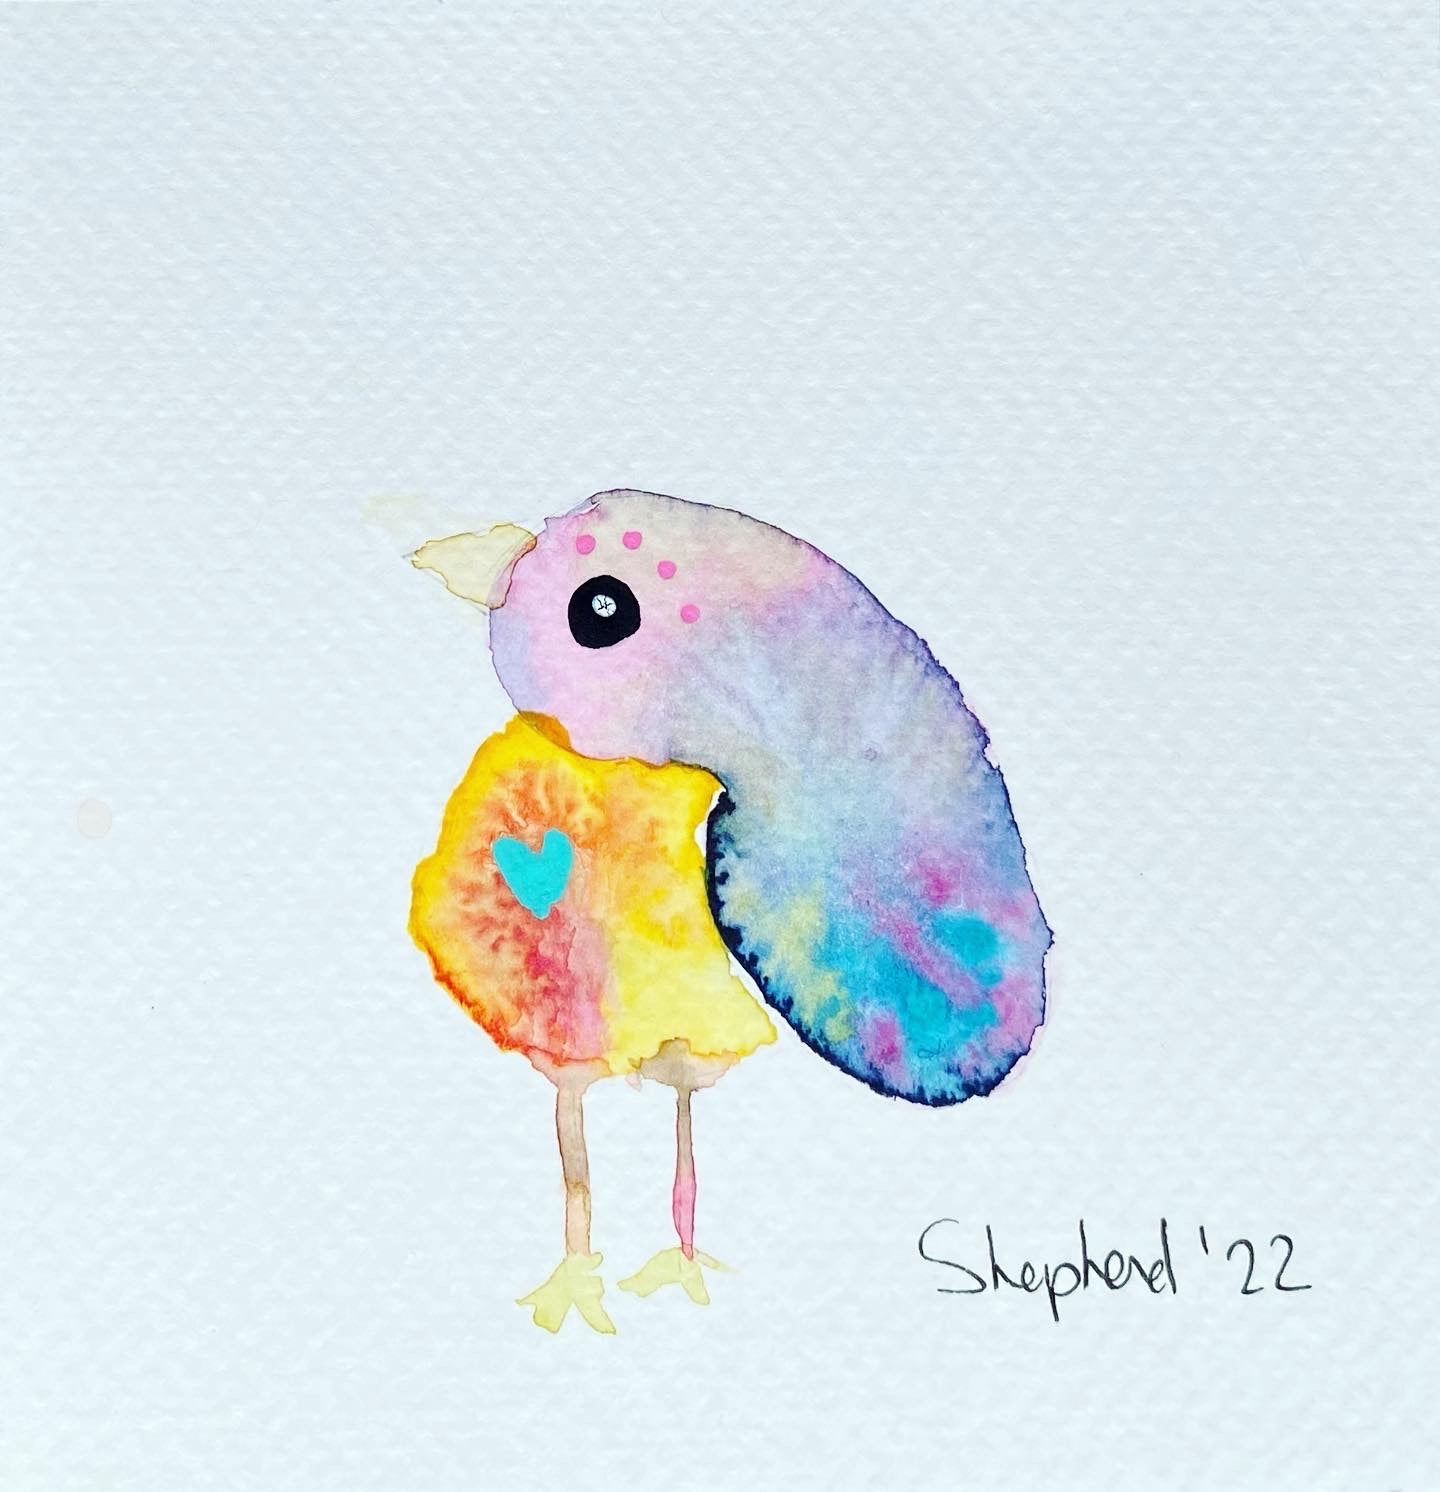 "Jennifer" Gratitude Bird - Original Watercolour Painting for yourself or send to a loved one